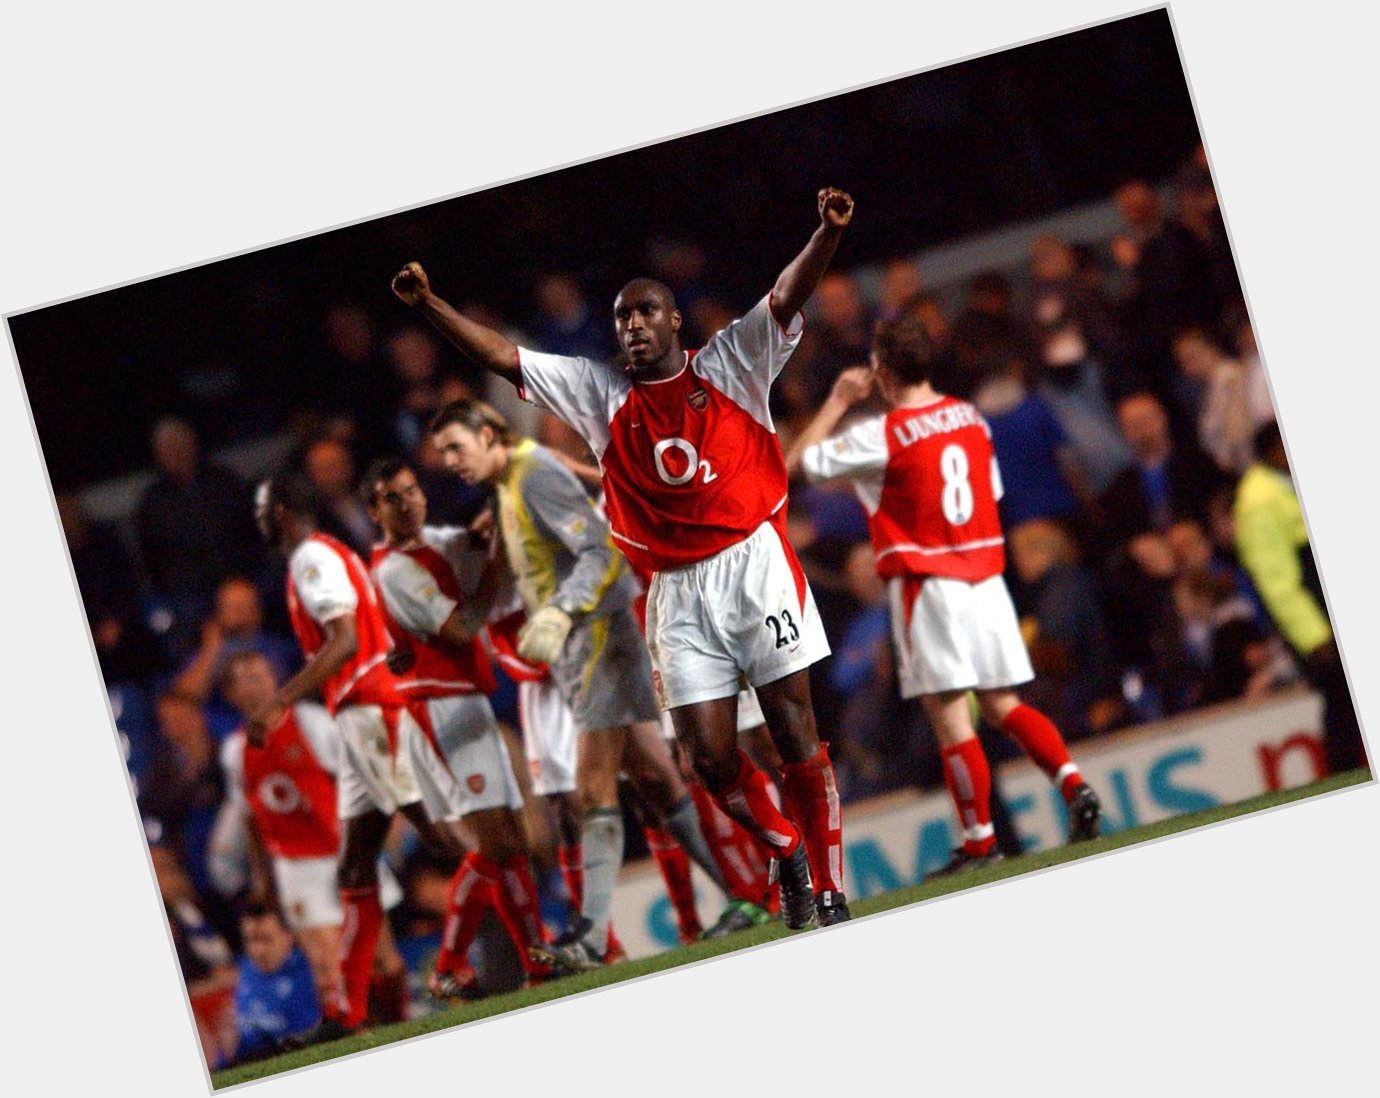 Happy birthday to the big man Sol Campbell! 